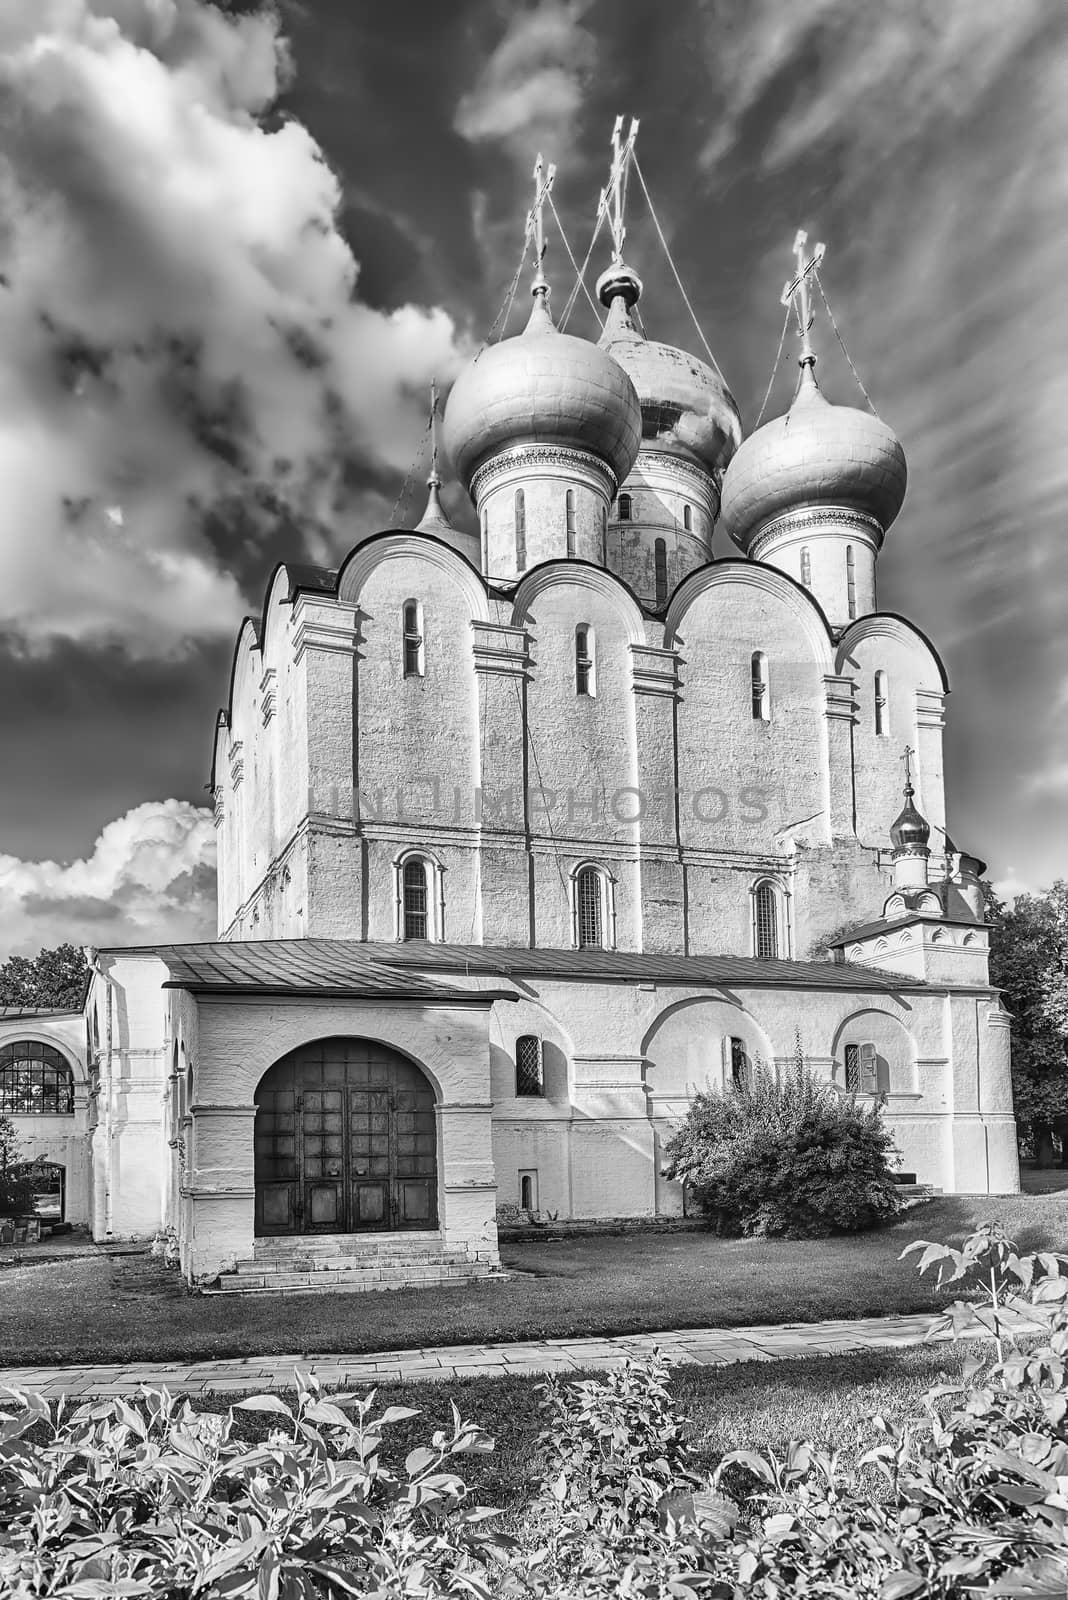 Orthodox church inside Novodevichy convent, iconic landmark and sightseeing in Moscow, Russia. UNESCO World Heritage Site